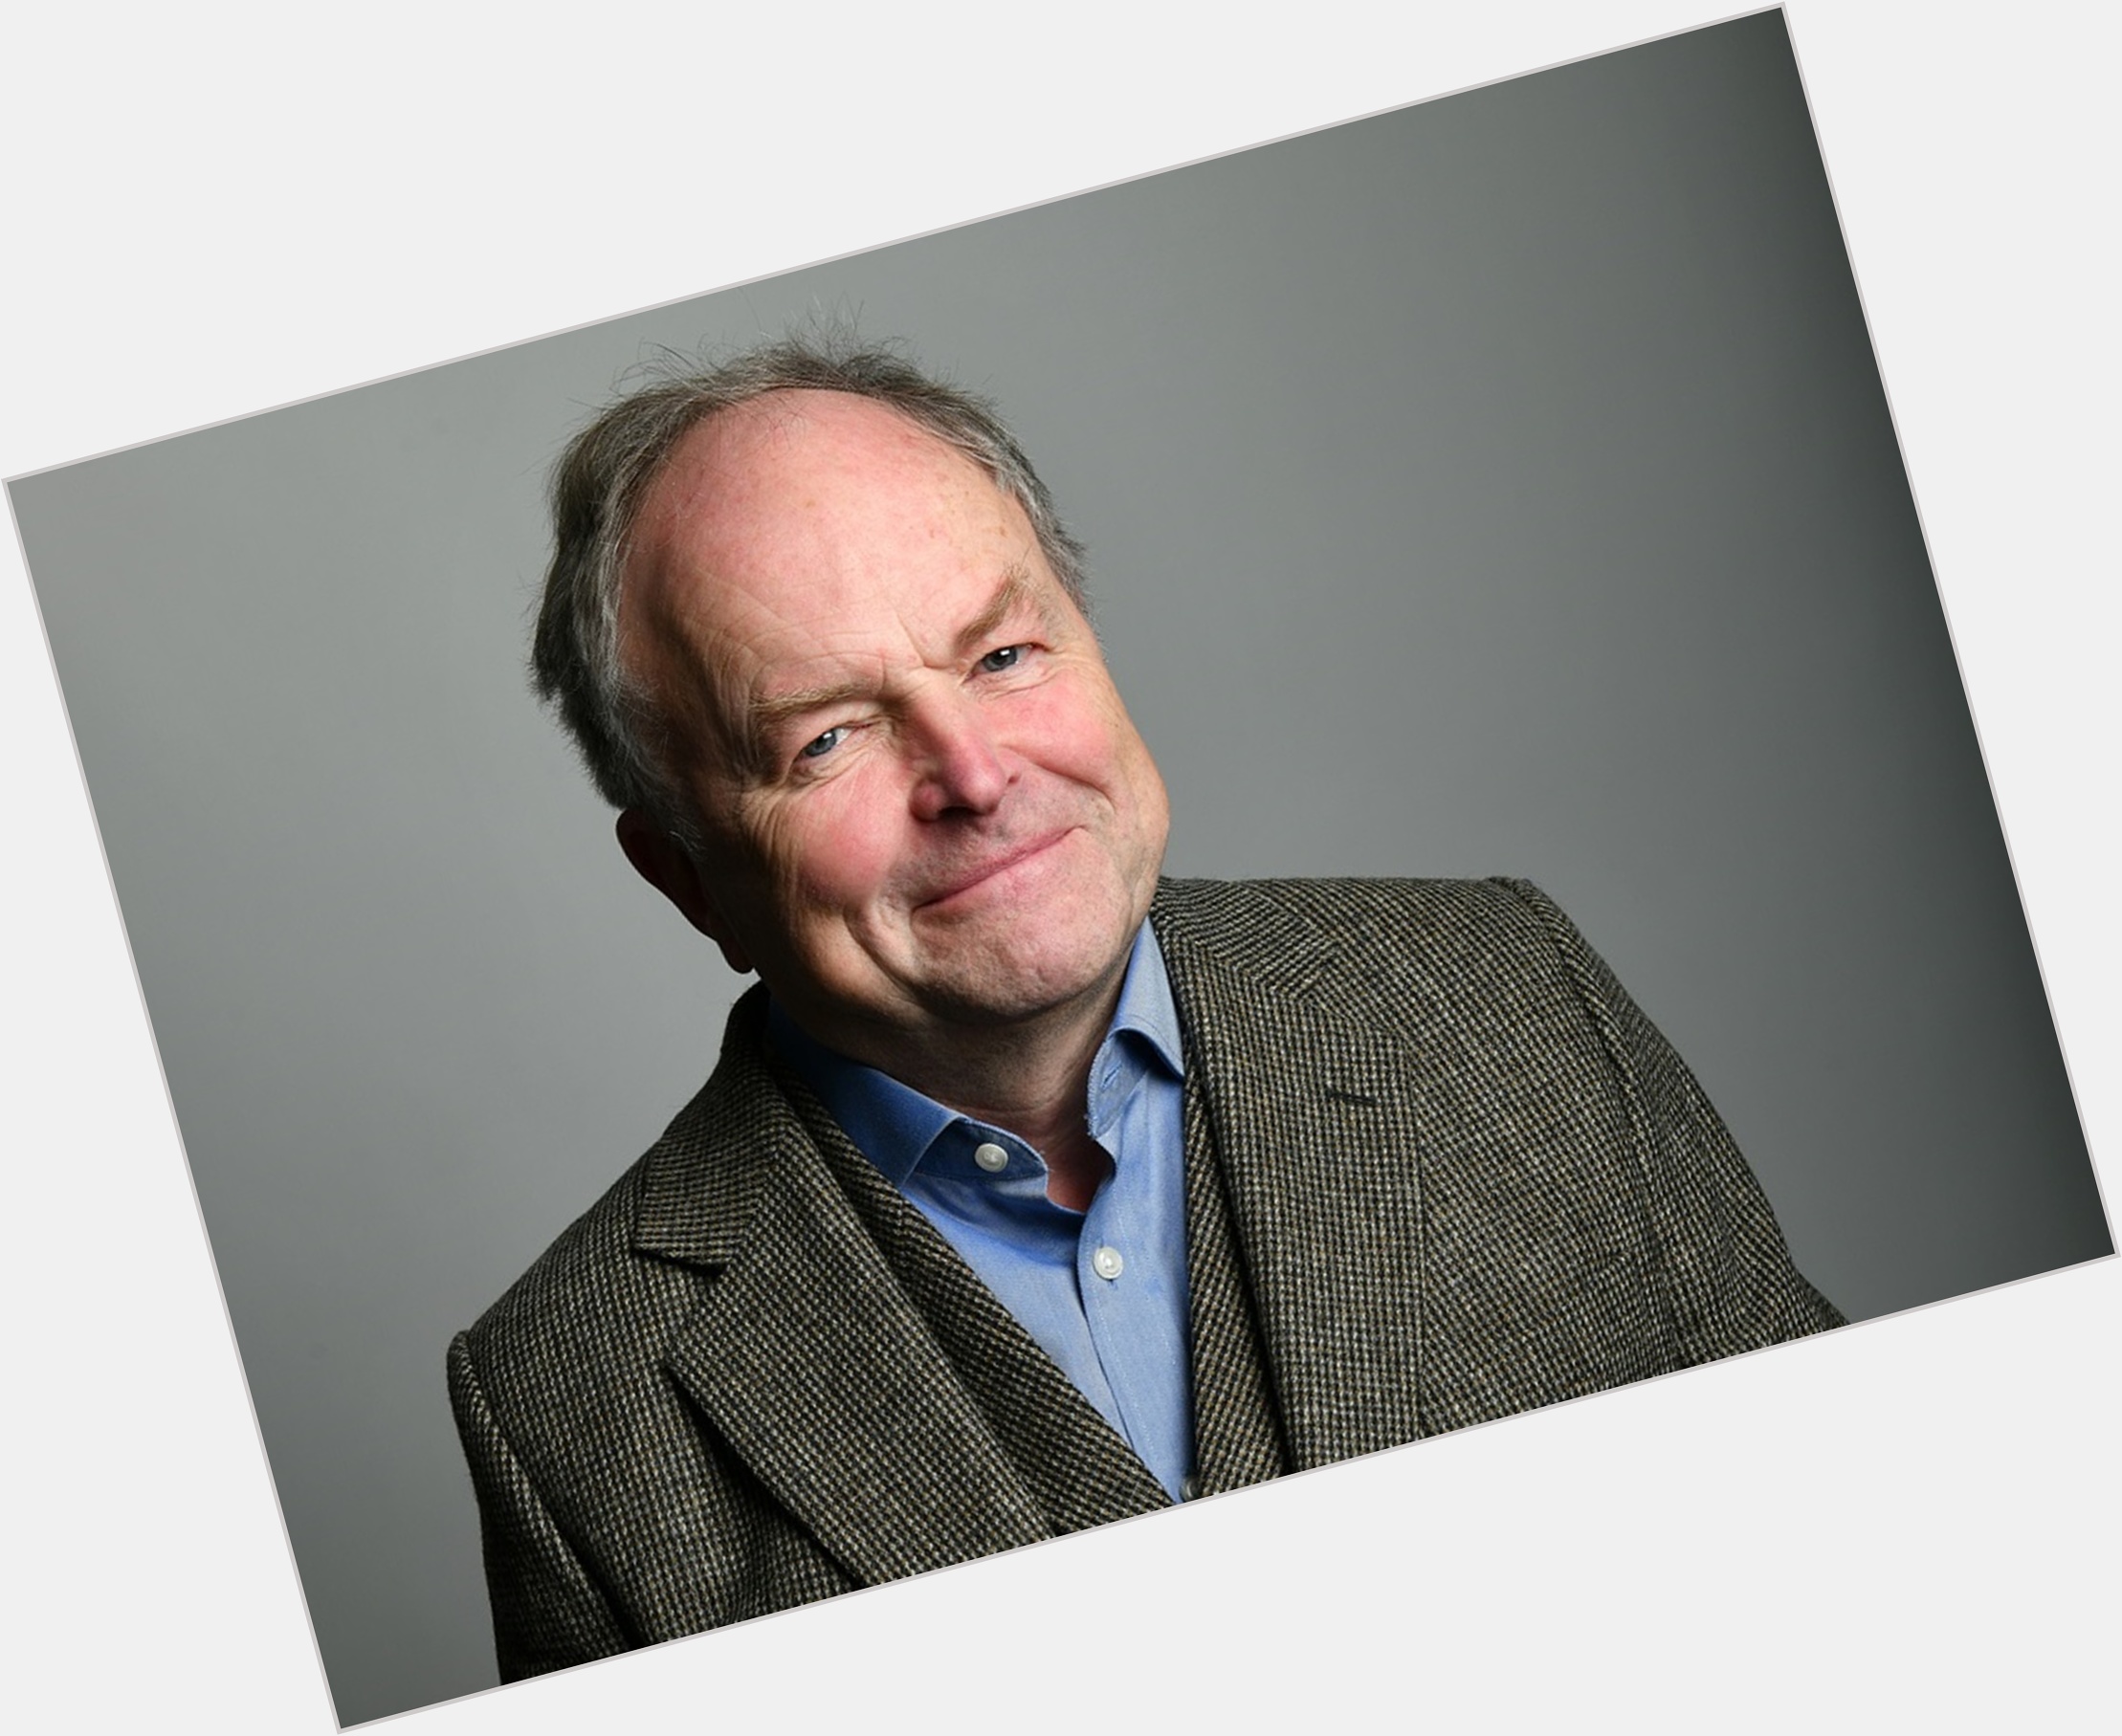 Https://fanpagepress.net/m/C/Clive Anderson Sexy 0